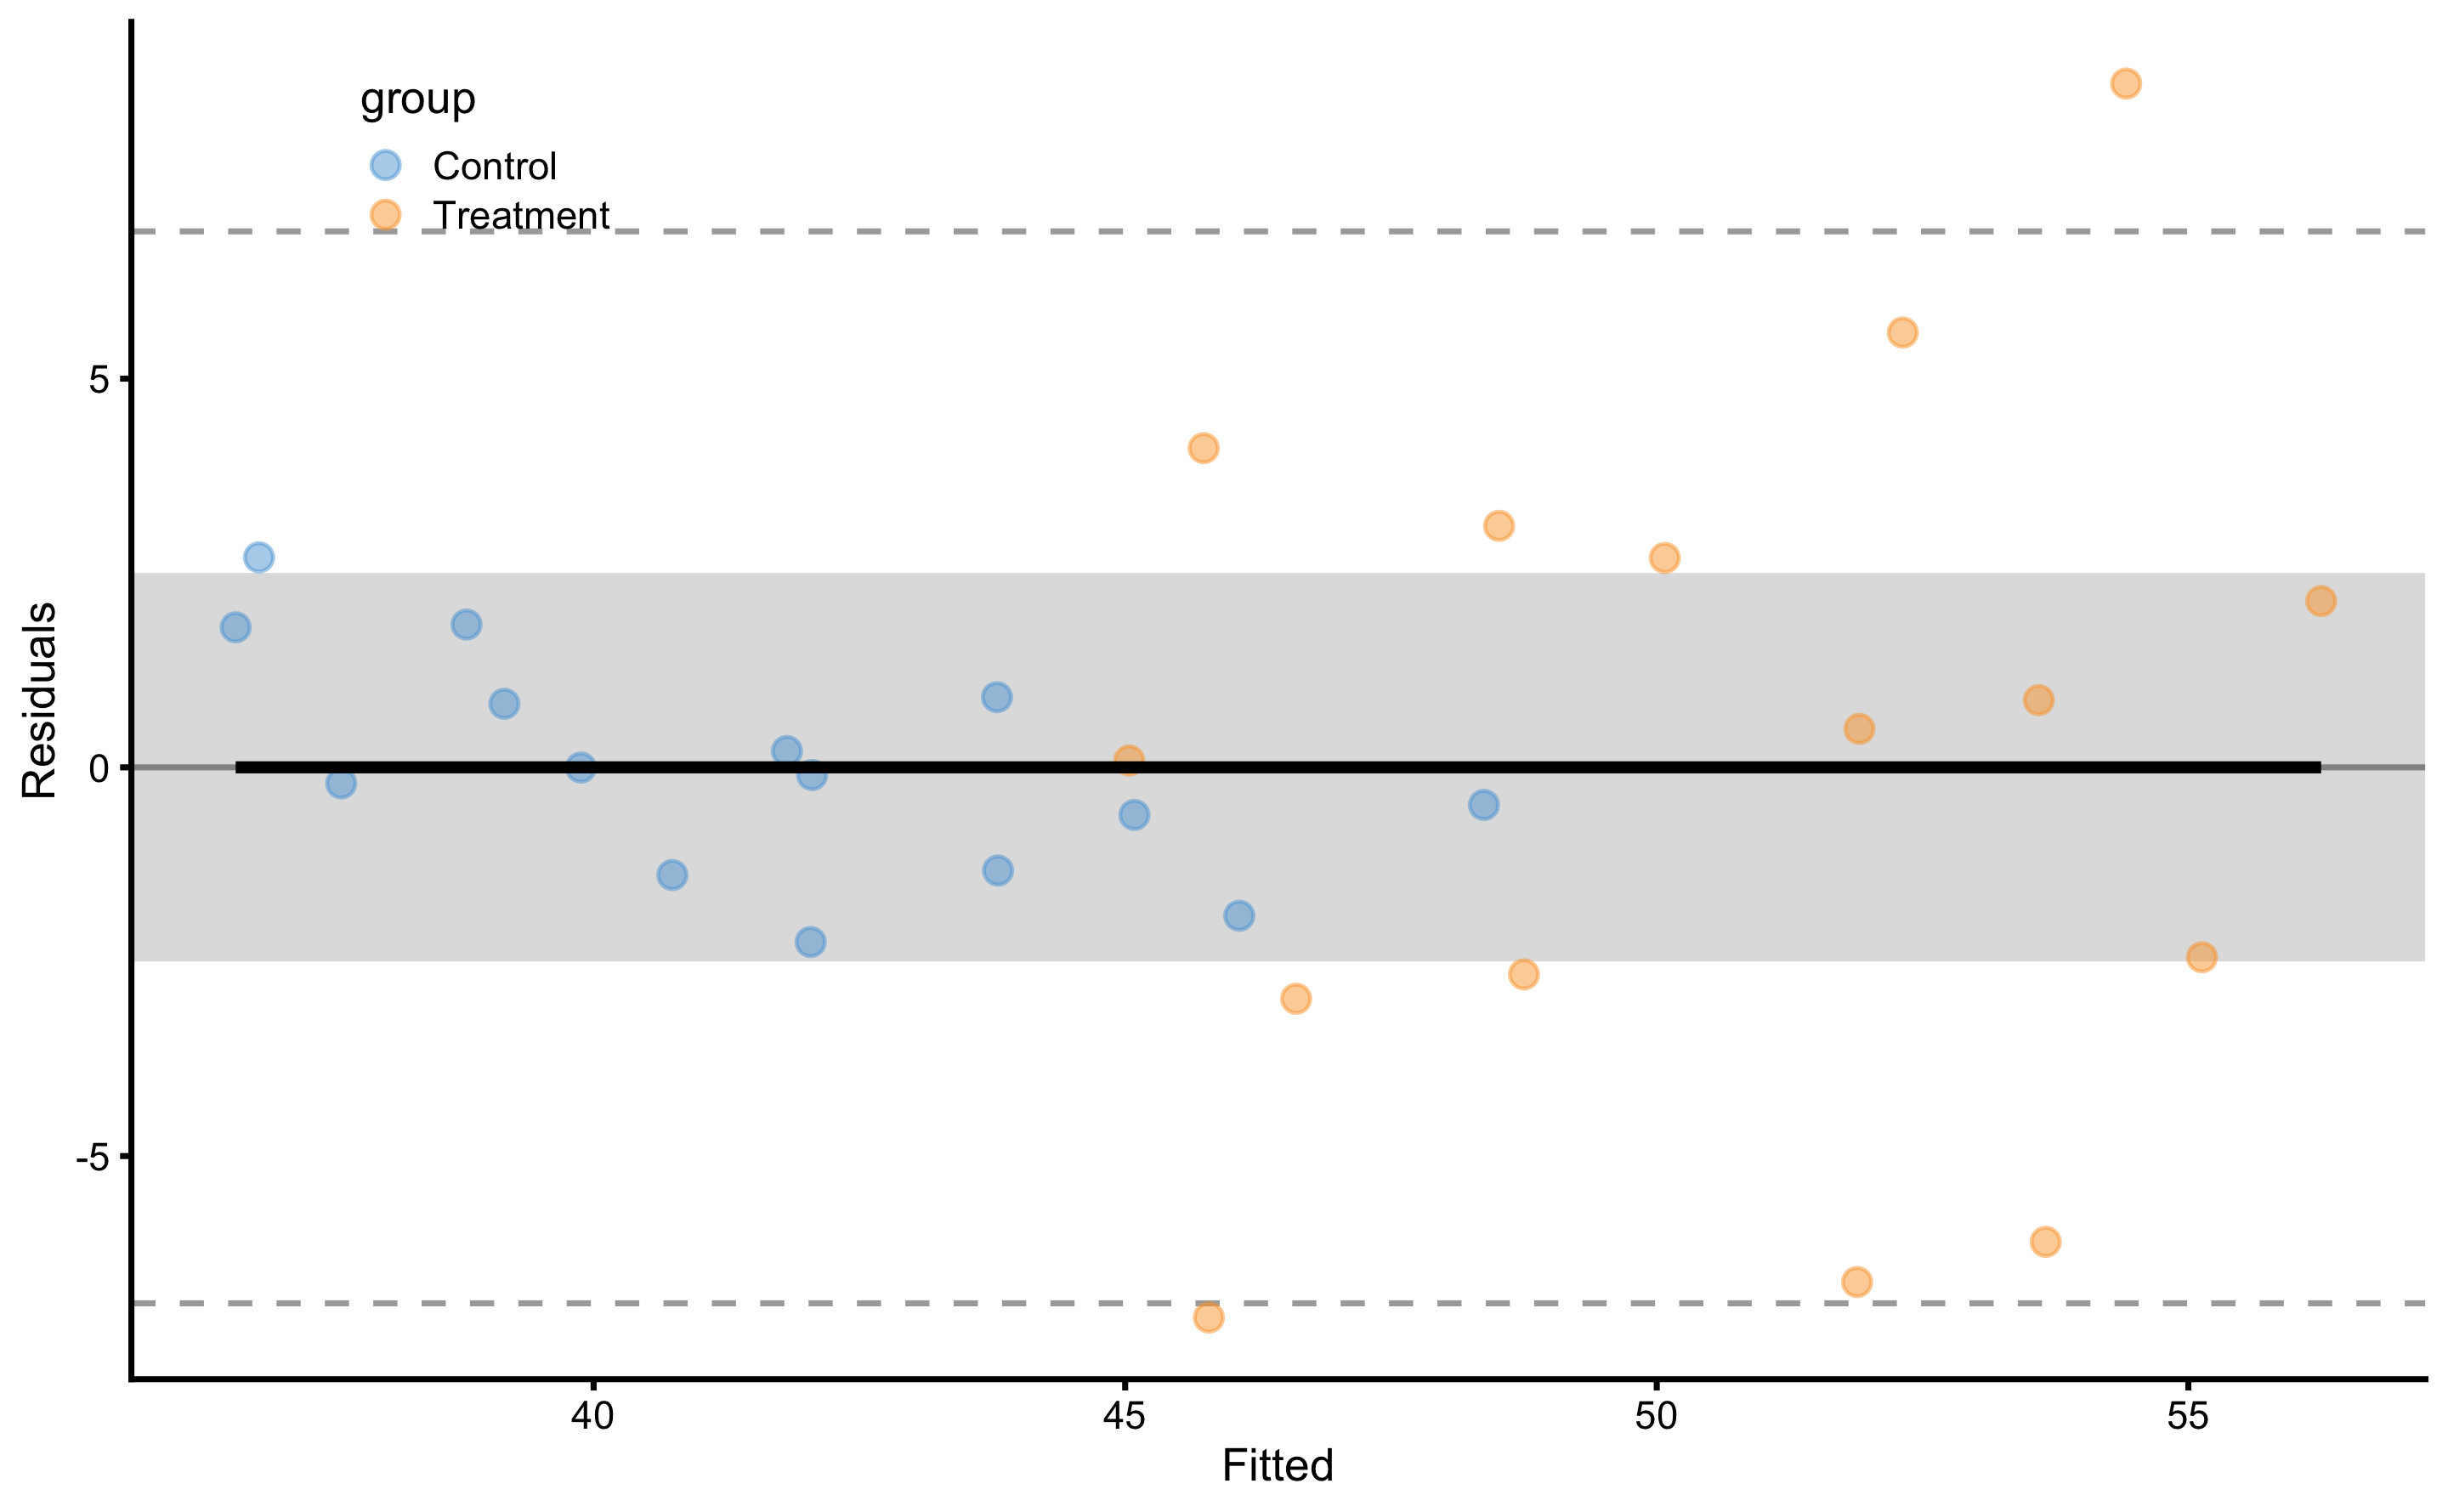 Model residuals using ANCOVA RCT model. Grey band represents SESOI of ±2.5cm. Residuals are color coded; blue are Control group and orange are Treatment group.